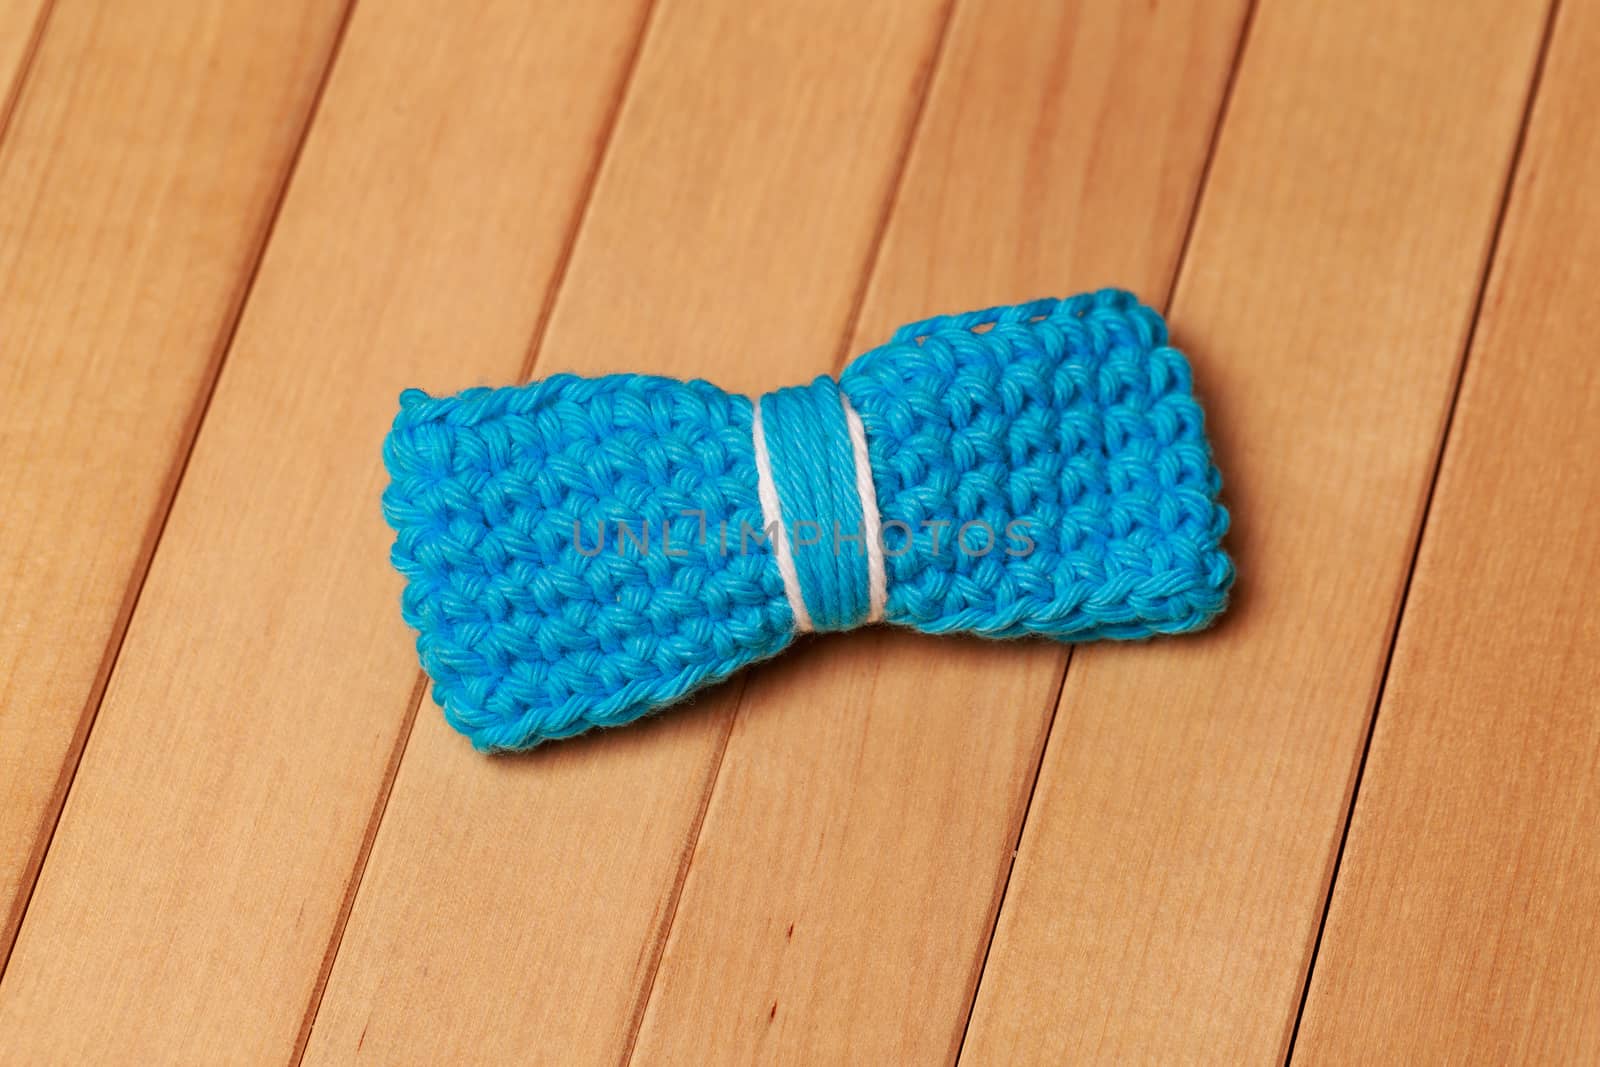 Knitting bow tie